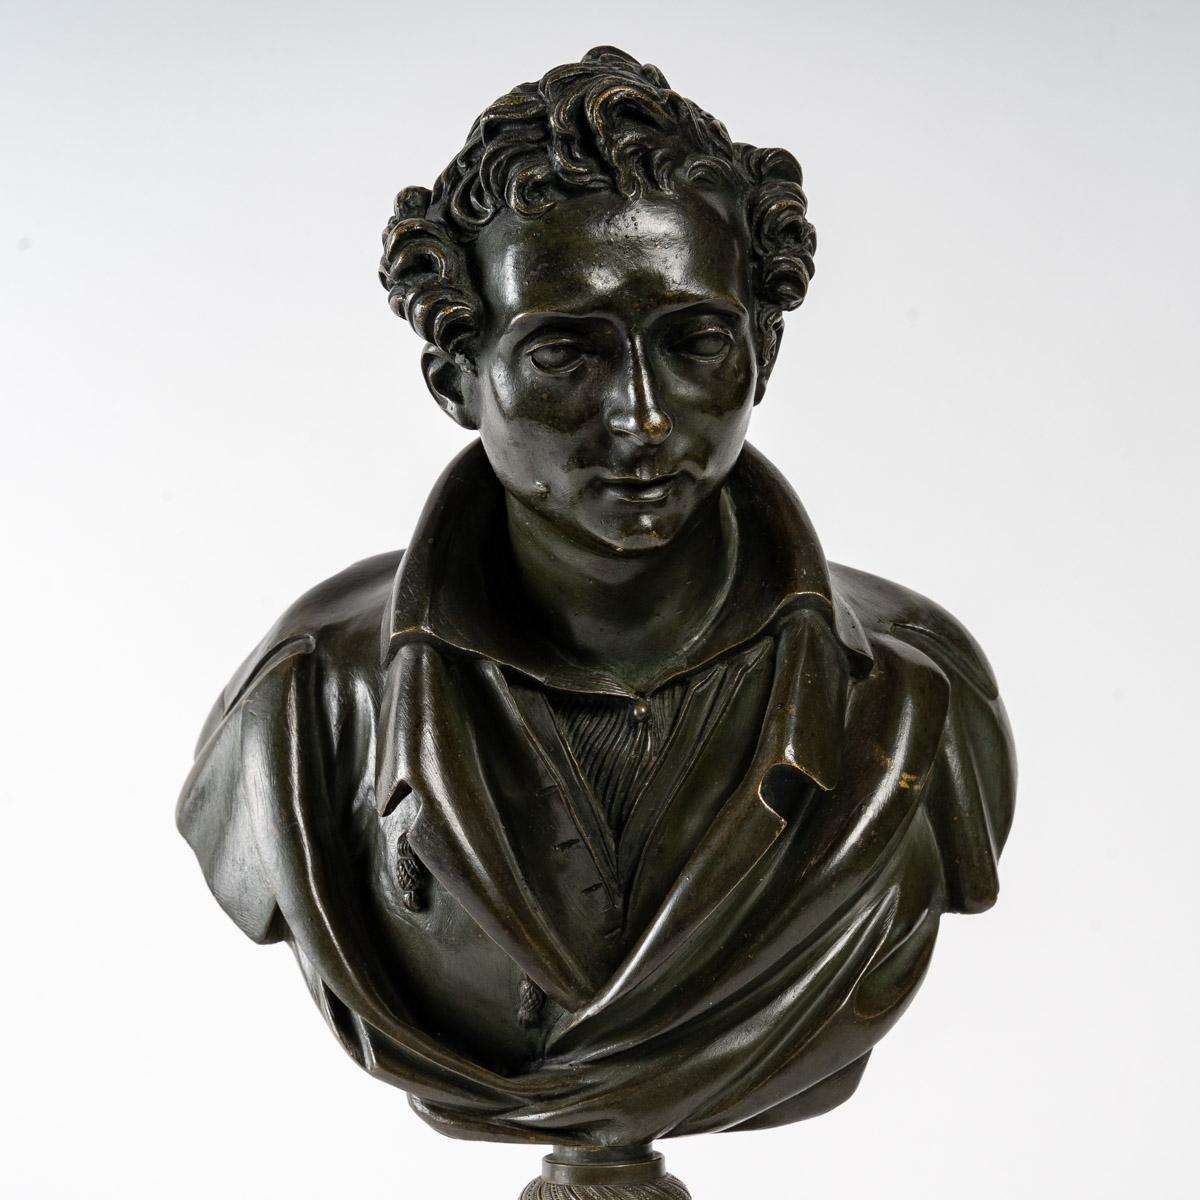 Bronze and Marble Bust from the 19th century

Sculpture Representing a Bust of the 19th century in Bronze Patinated and Gilded and Marble Base.

Dimensions: H: 35.5cm, W: 16cm, D: 12.5cm.